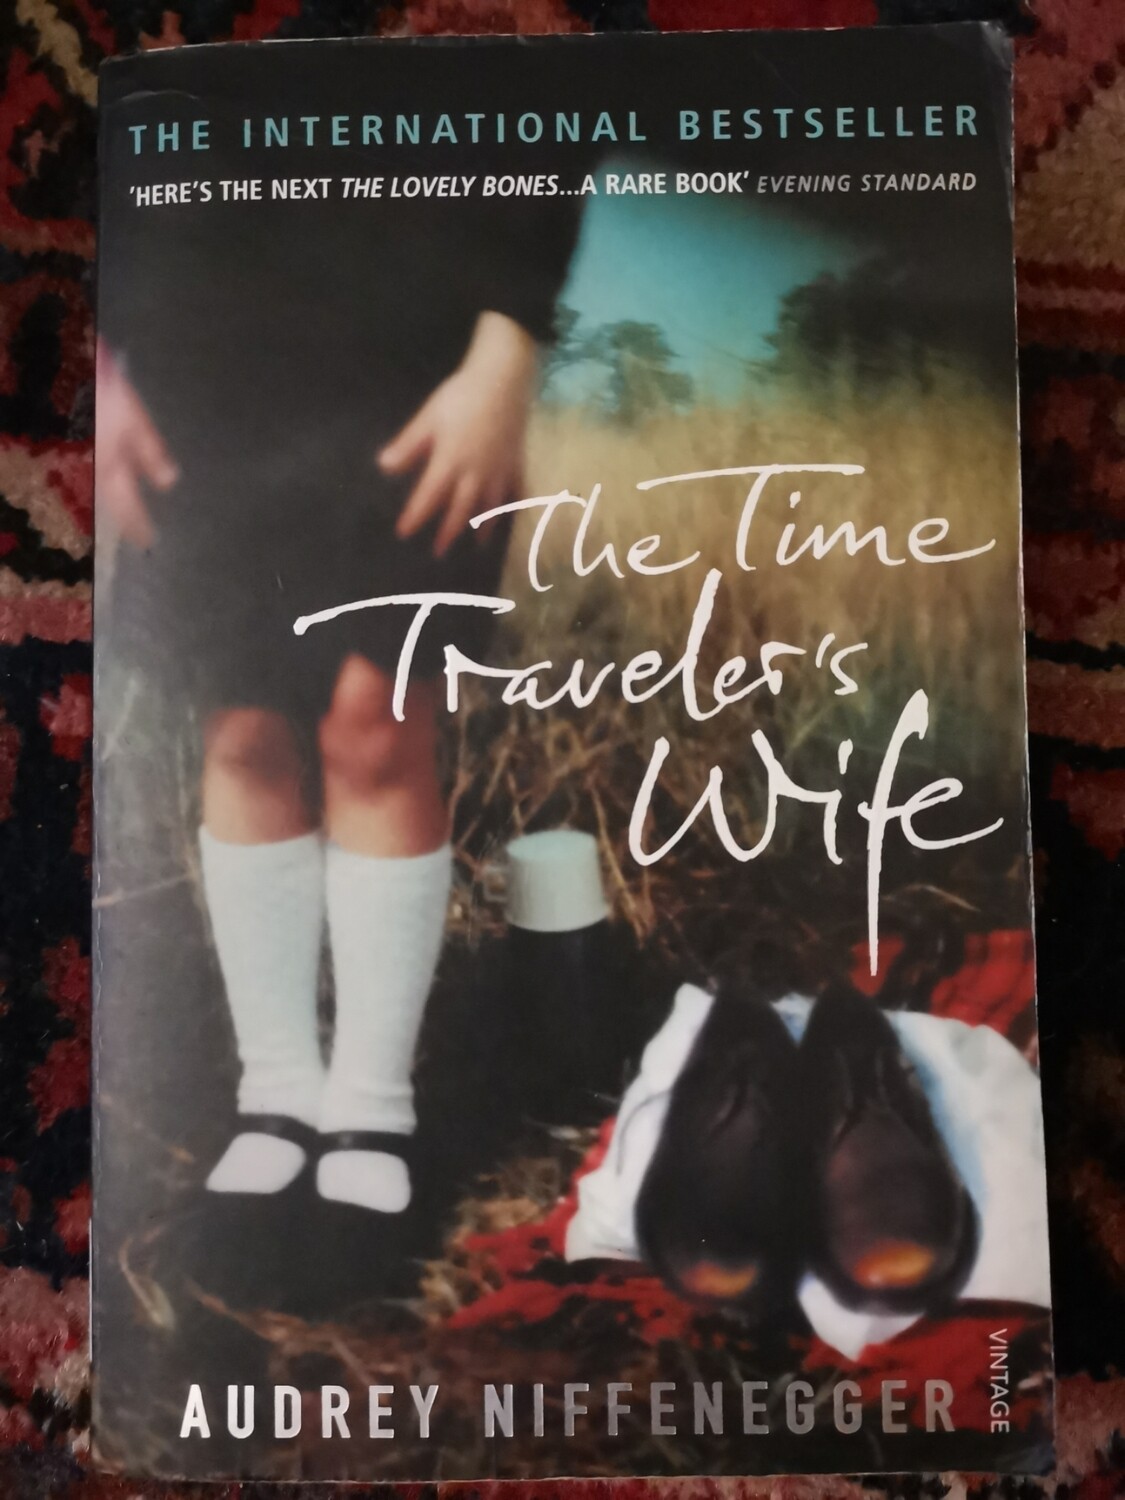 The time traveler's wife, Audrey Niffenegger